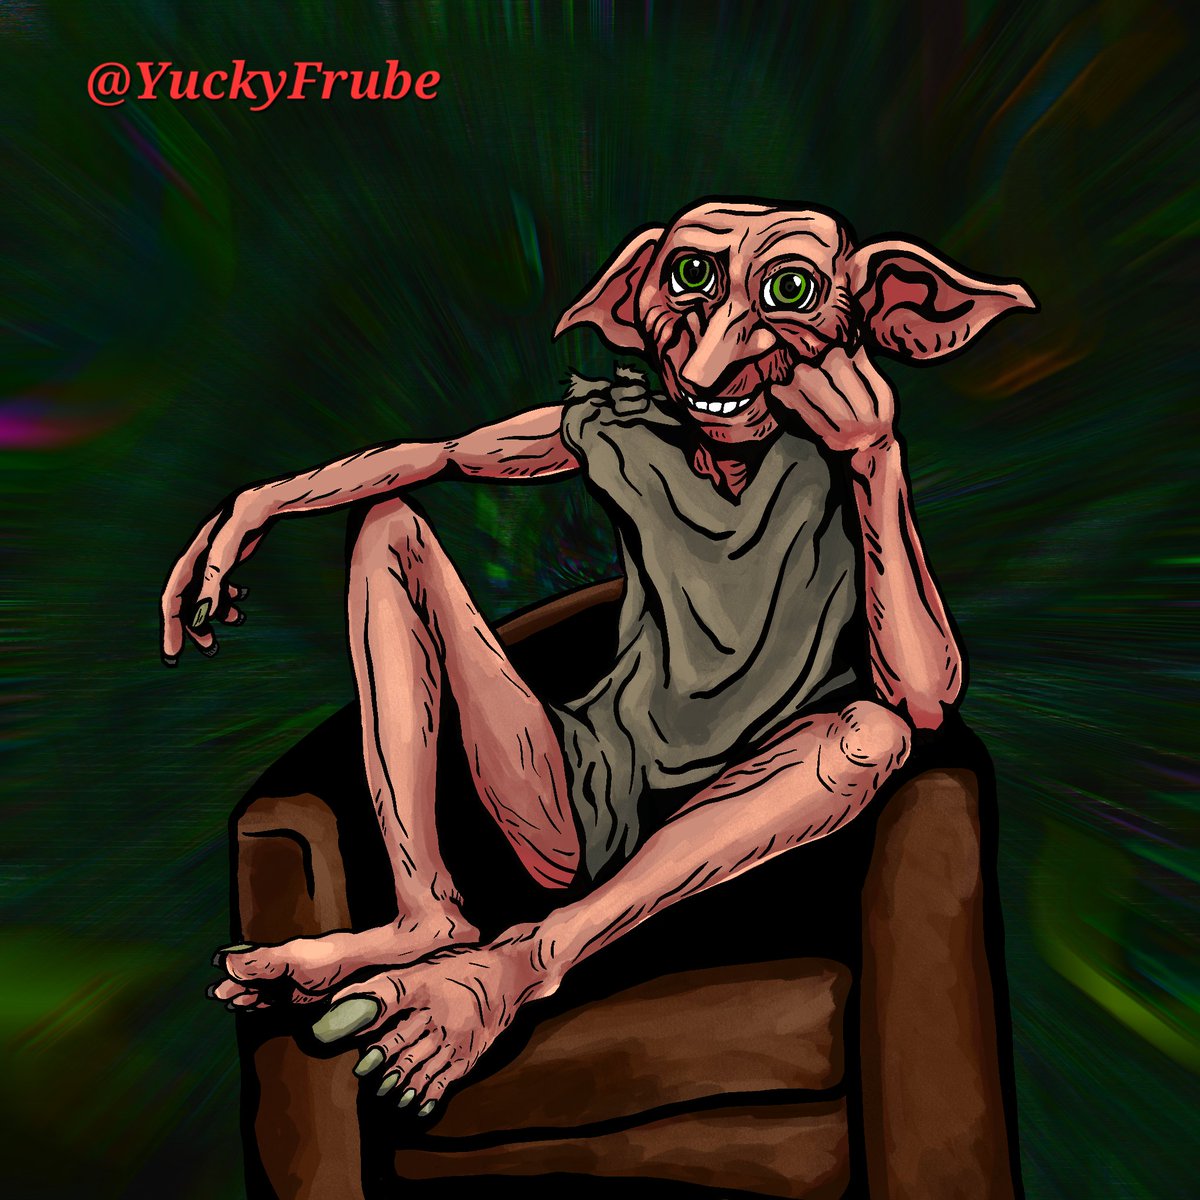 This lad is as fly as he is free! 

Also, if Dobby was real, he'd be an ally! 

#dobbythehouseelf #dobby #dobbyisafreeelf #dobbyharrypotter #harrypotter #harrypotterfanart #fanart #charisma #coolestbadboi #coolestgoodboy #lad #king #theshit #wizardingworldofharrypotter #ALLY